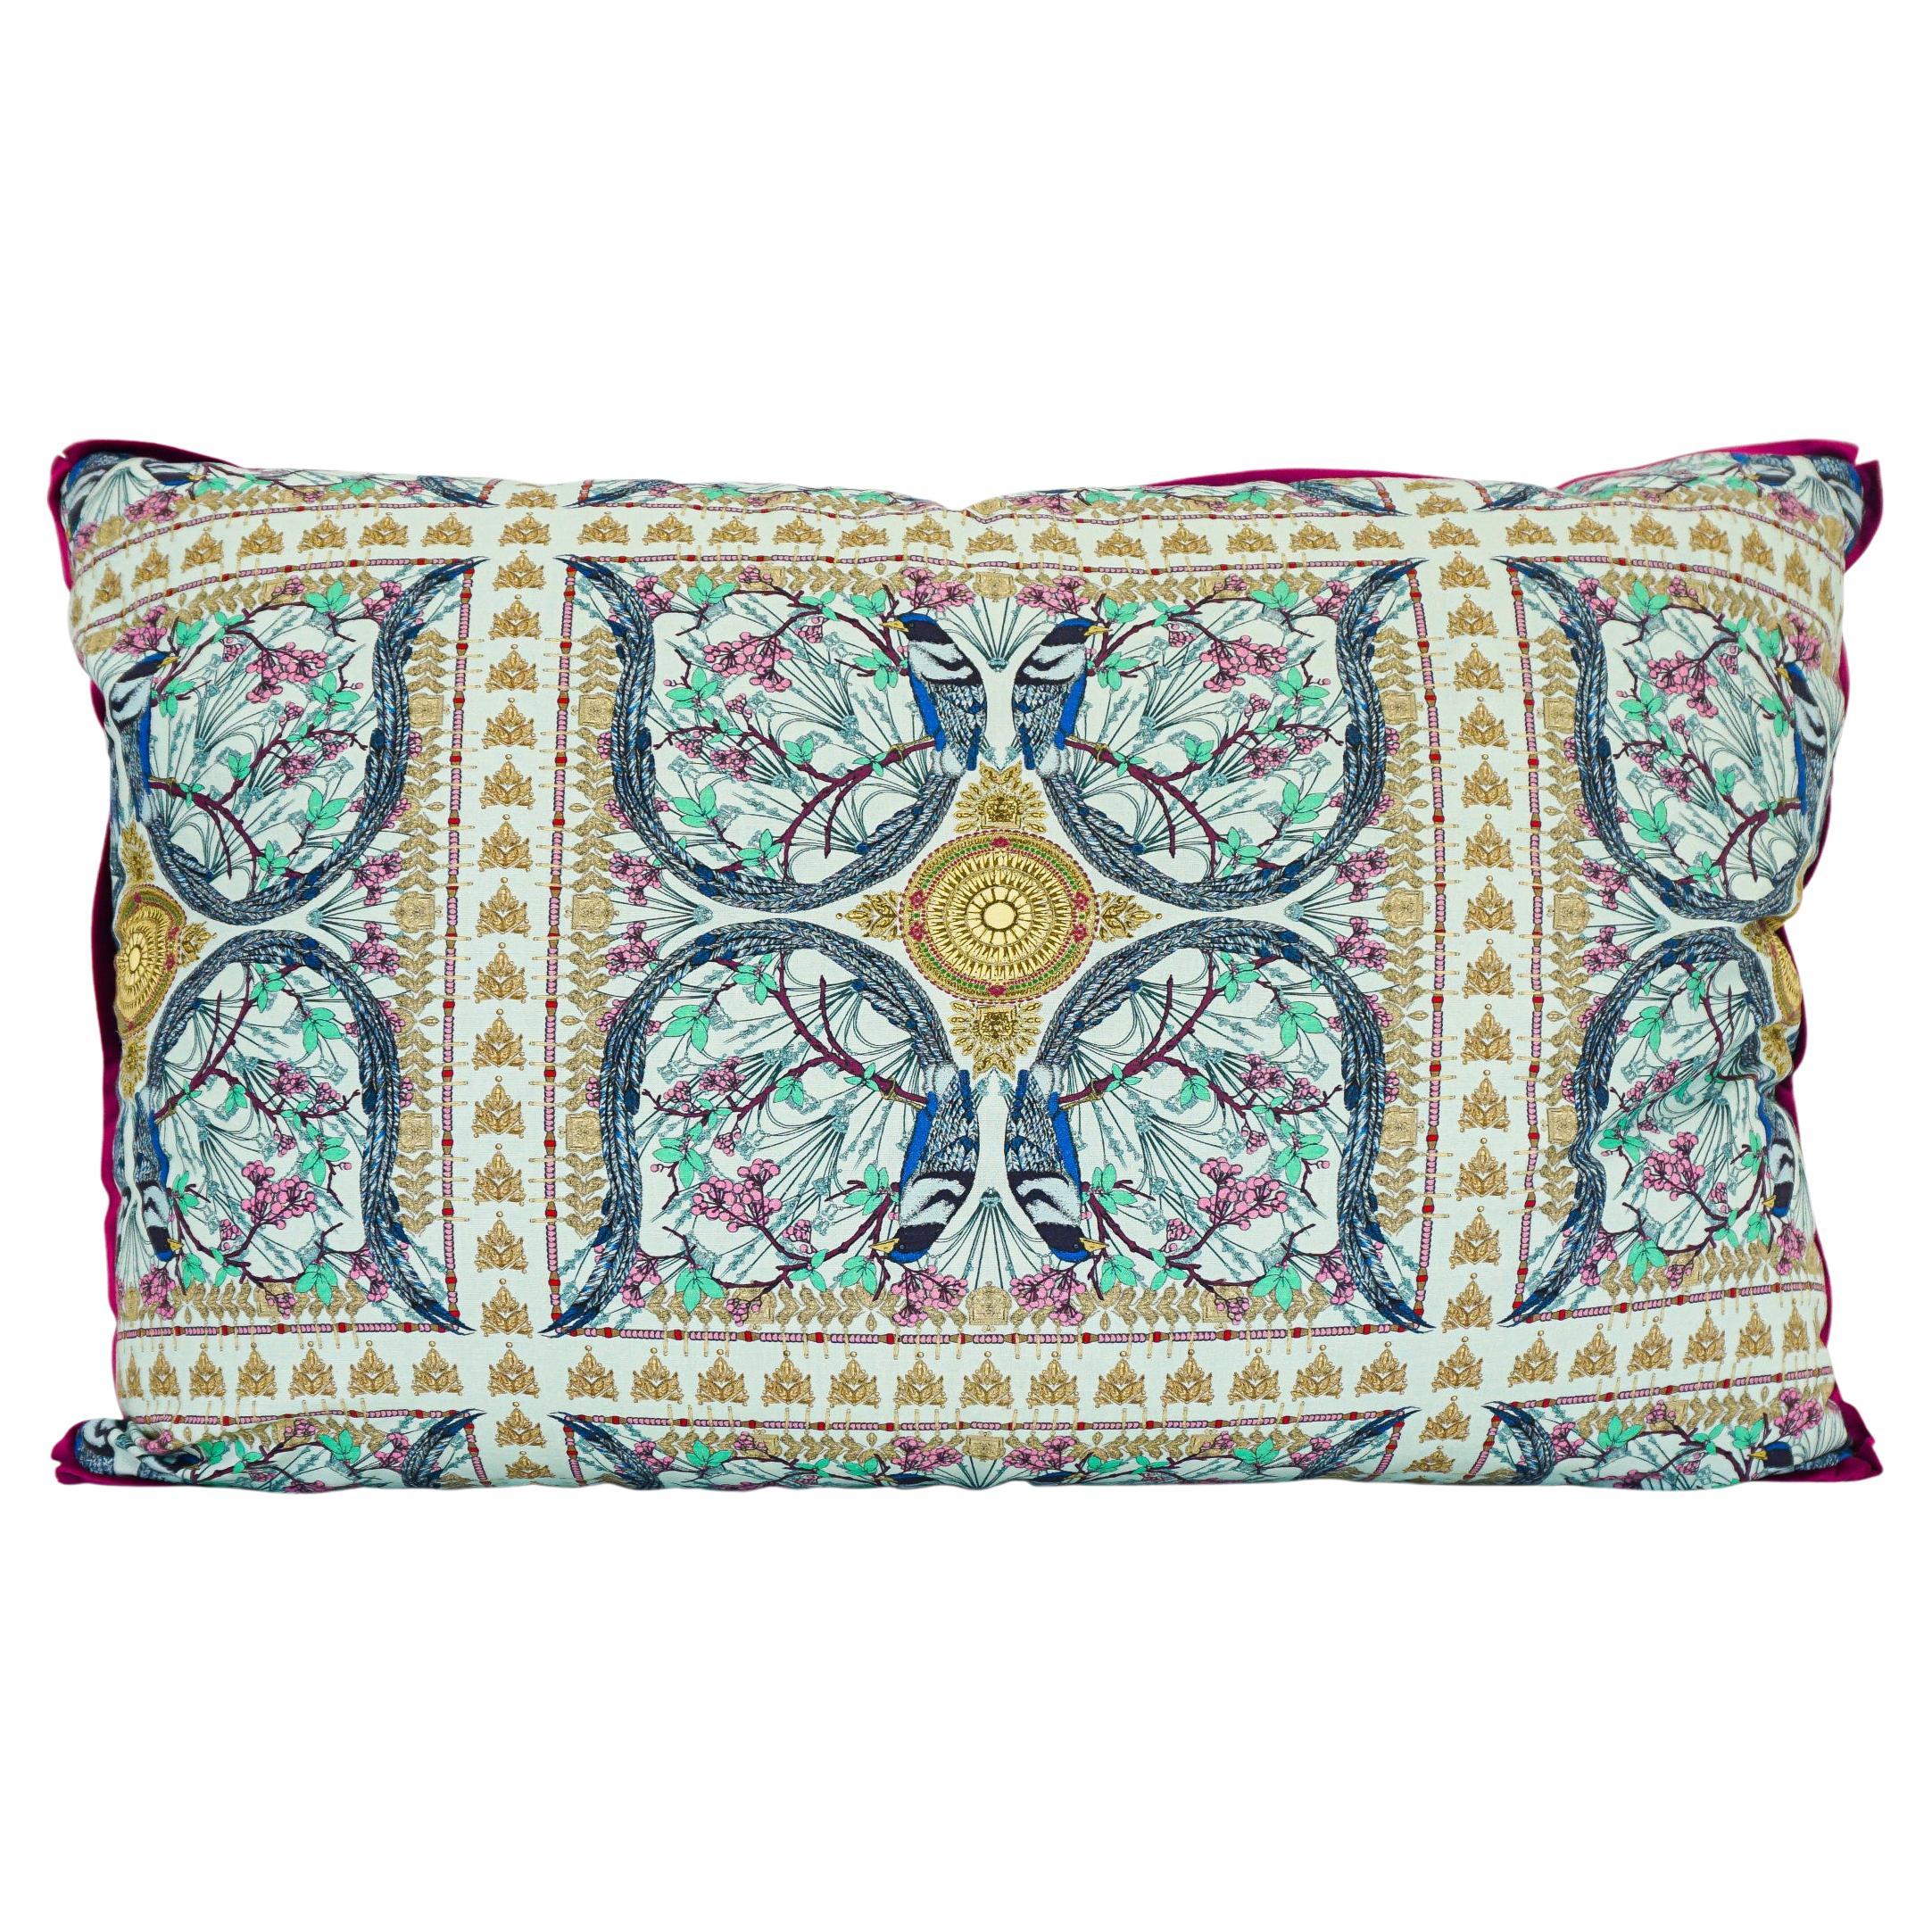 Oversized Throw Pillow with Elaborate Printed Linen, Aqua Back and Berry Flange For Sale